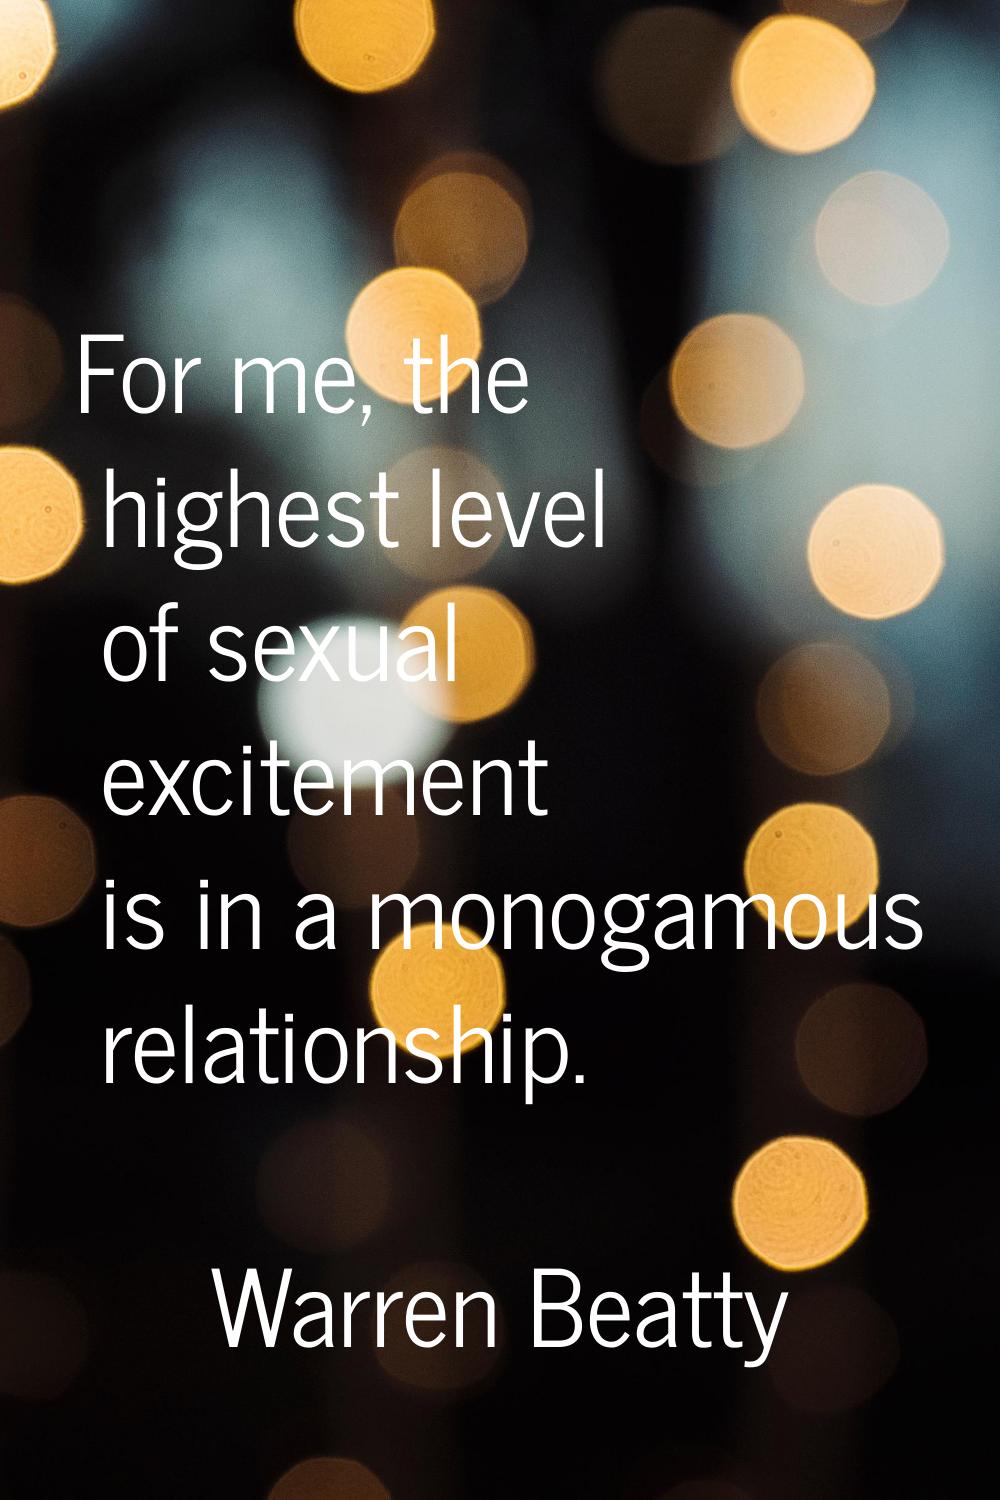 For me, the highest level of sexual excitement is in a monogamous relationship.